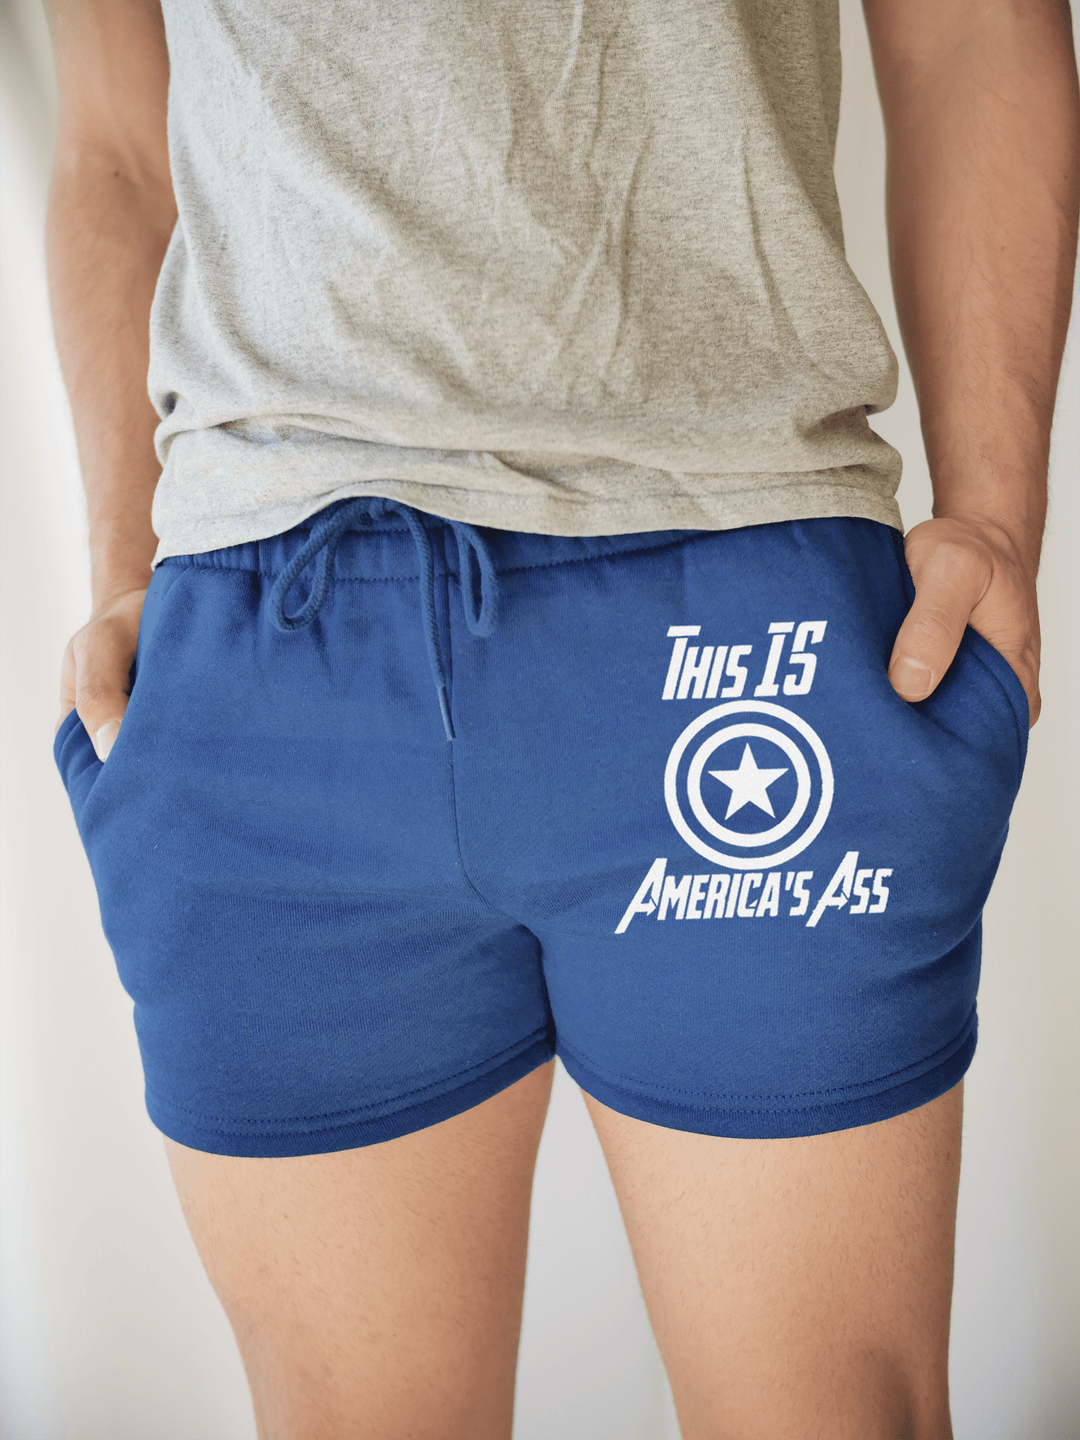 PixelThat Punderwear Shorts Royal Blue / Sm / Front This Is America's Ass Men's Gym Shorts